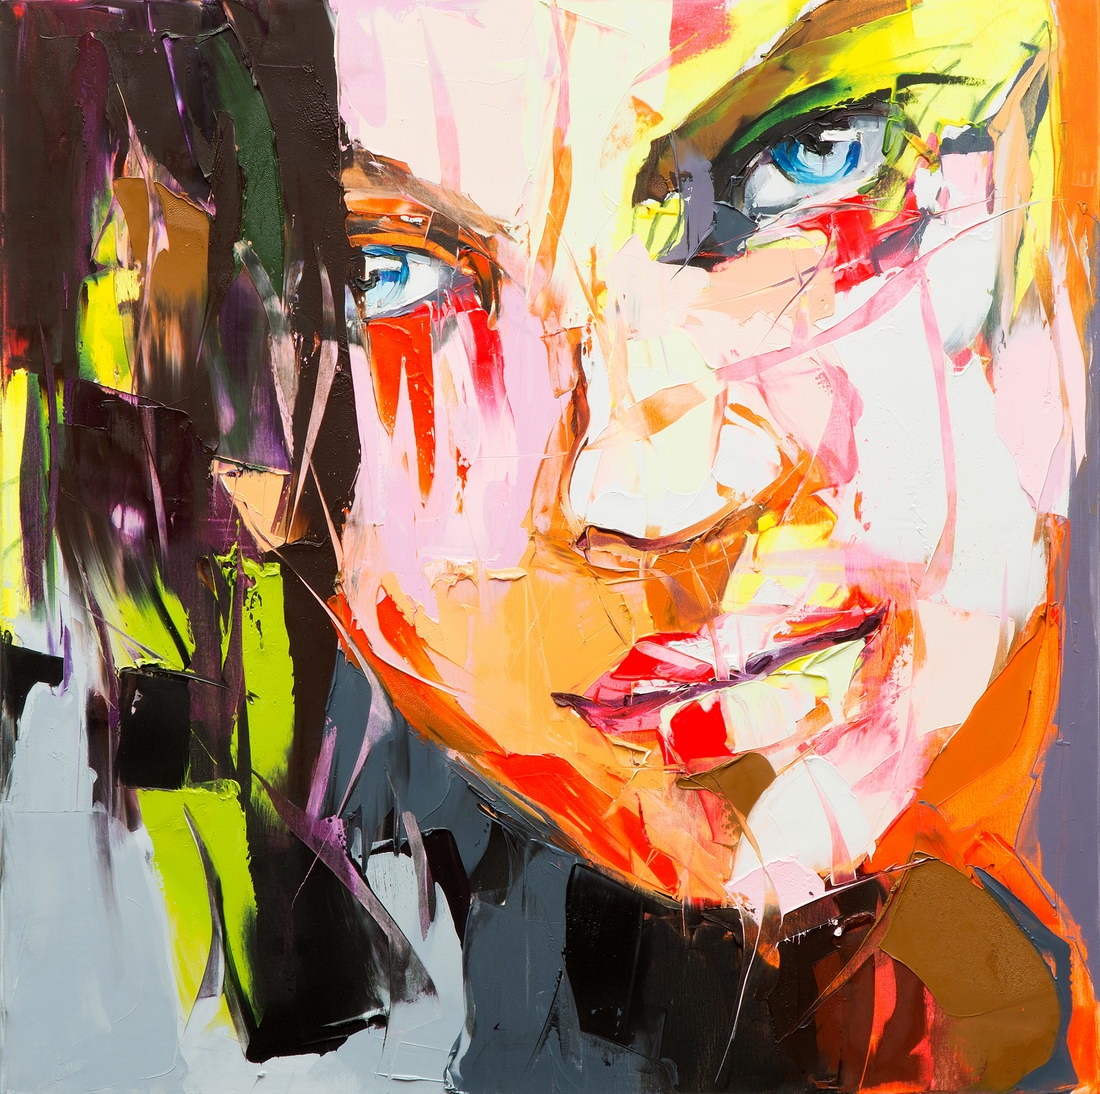 Portret by Francoise Nielly, 2006